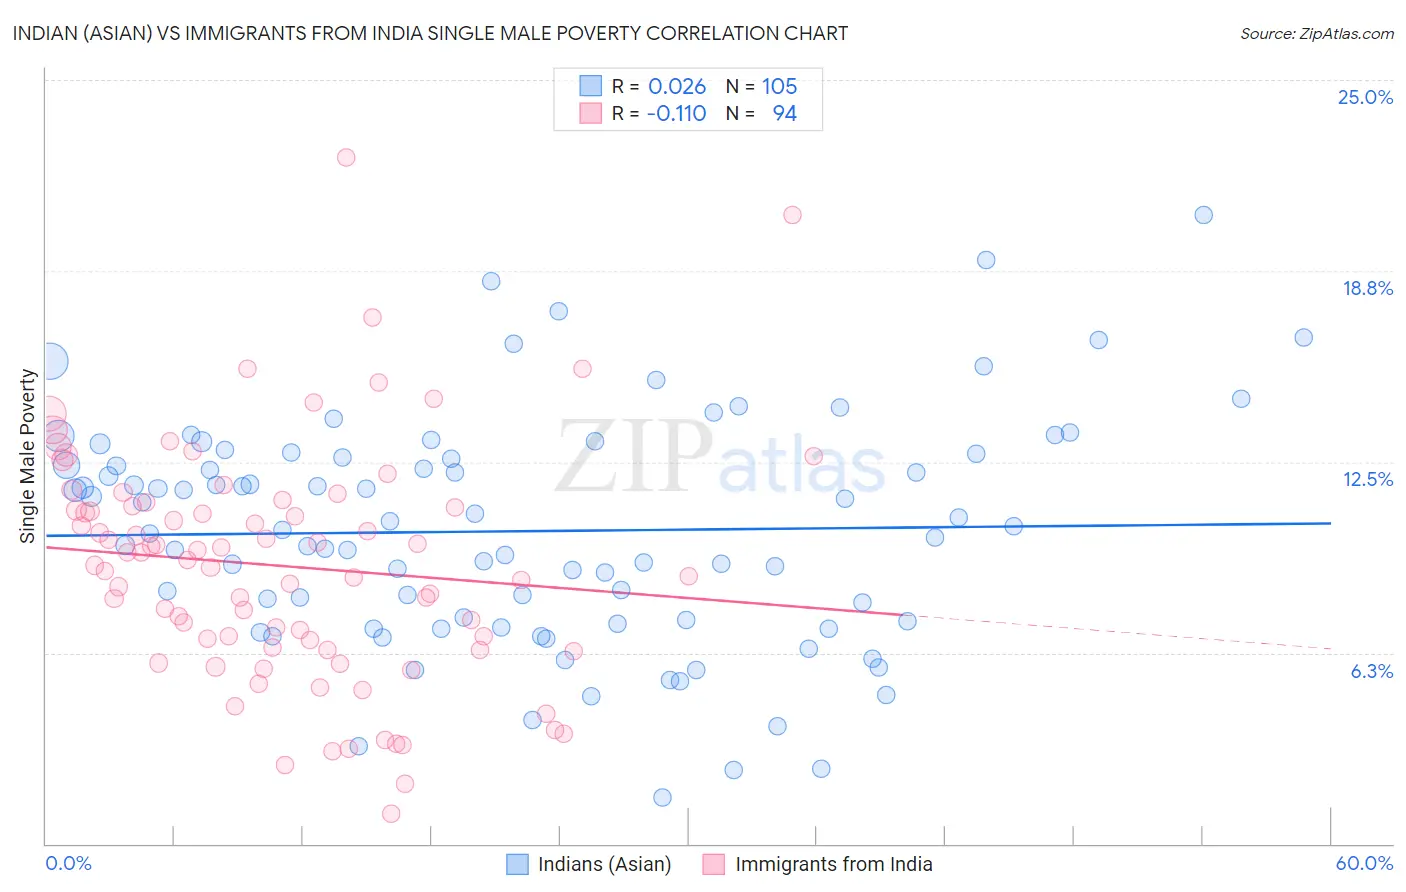 Indian (Asian) vs Immigrants from India Single Male Poverty